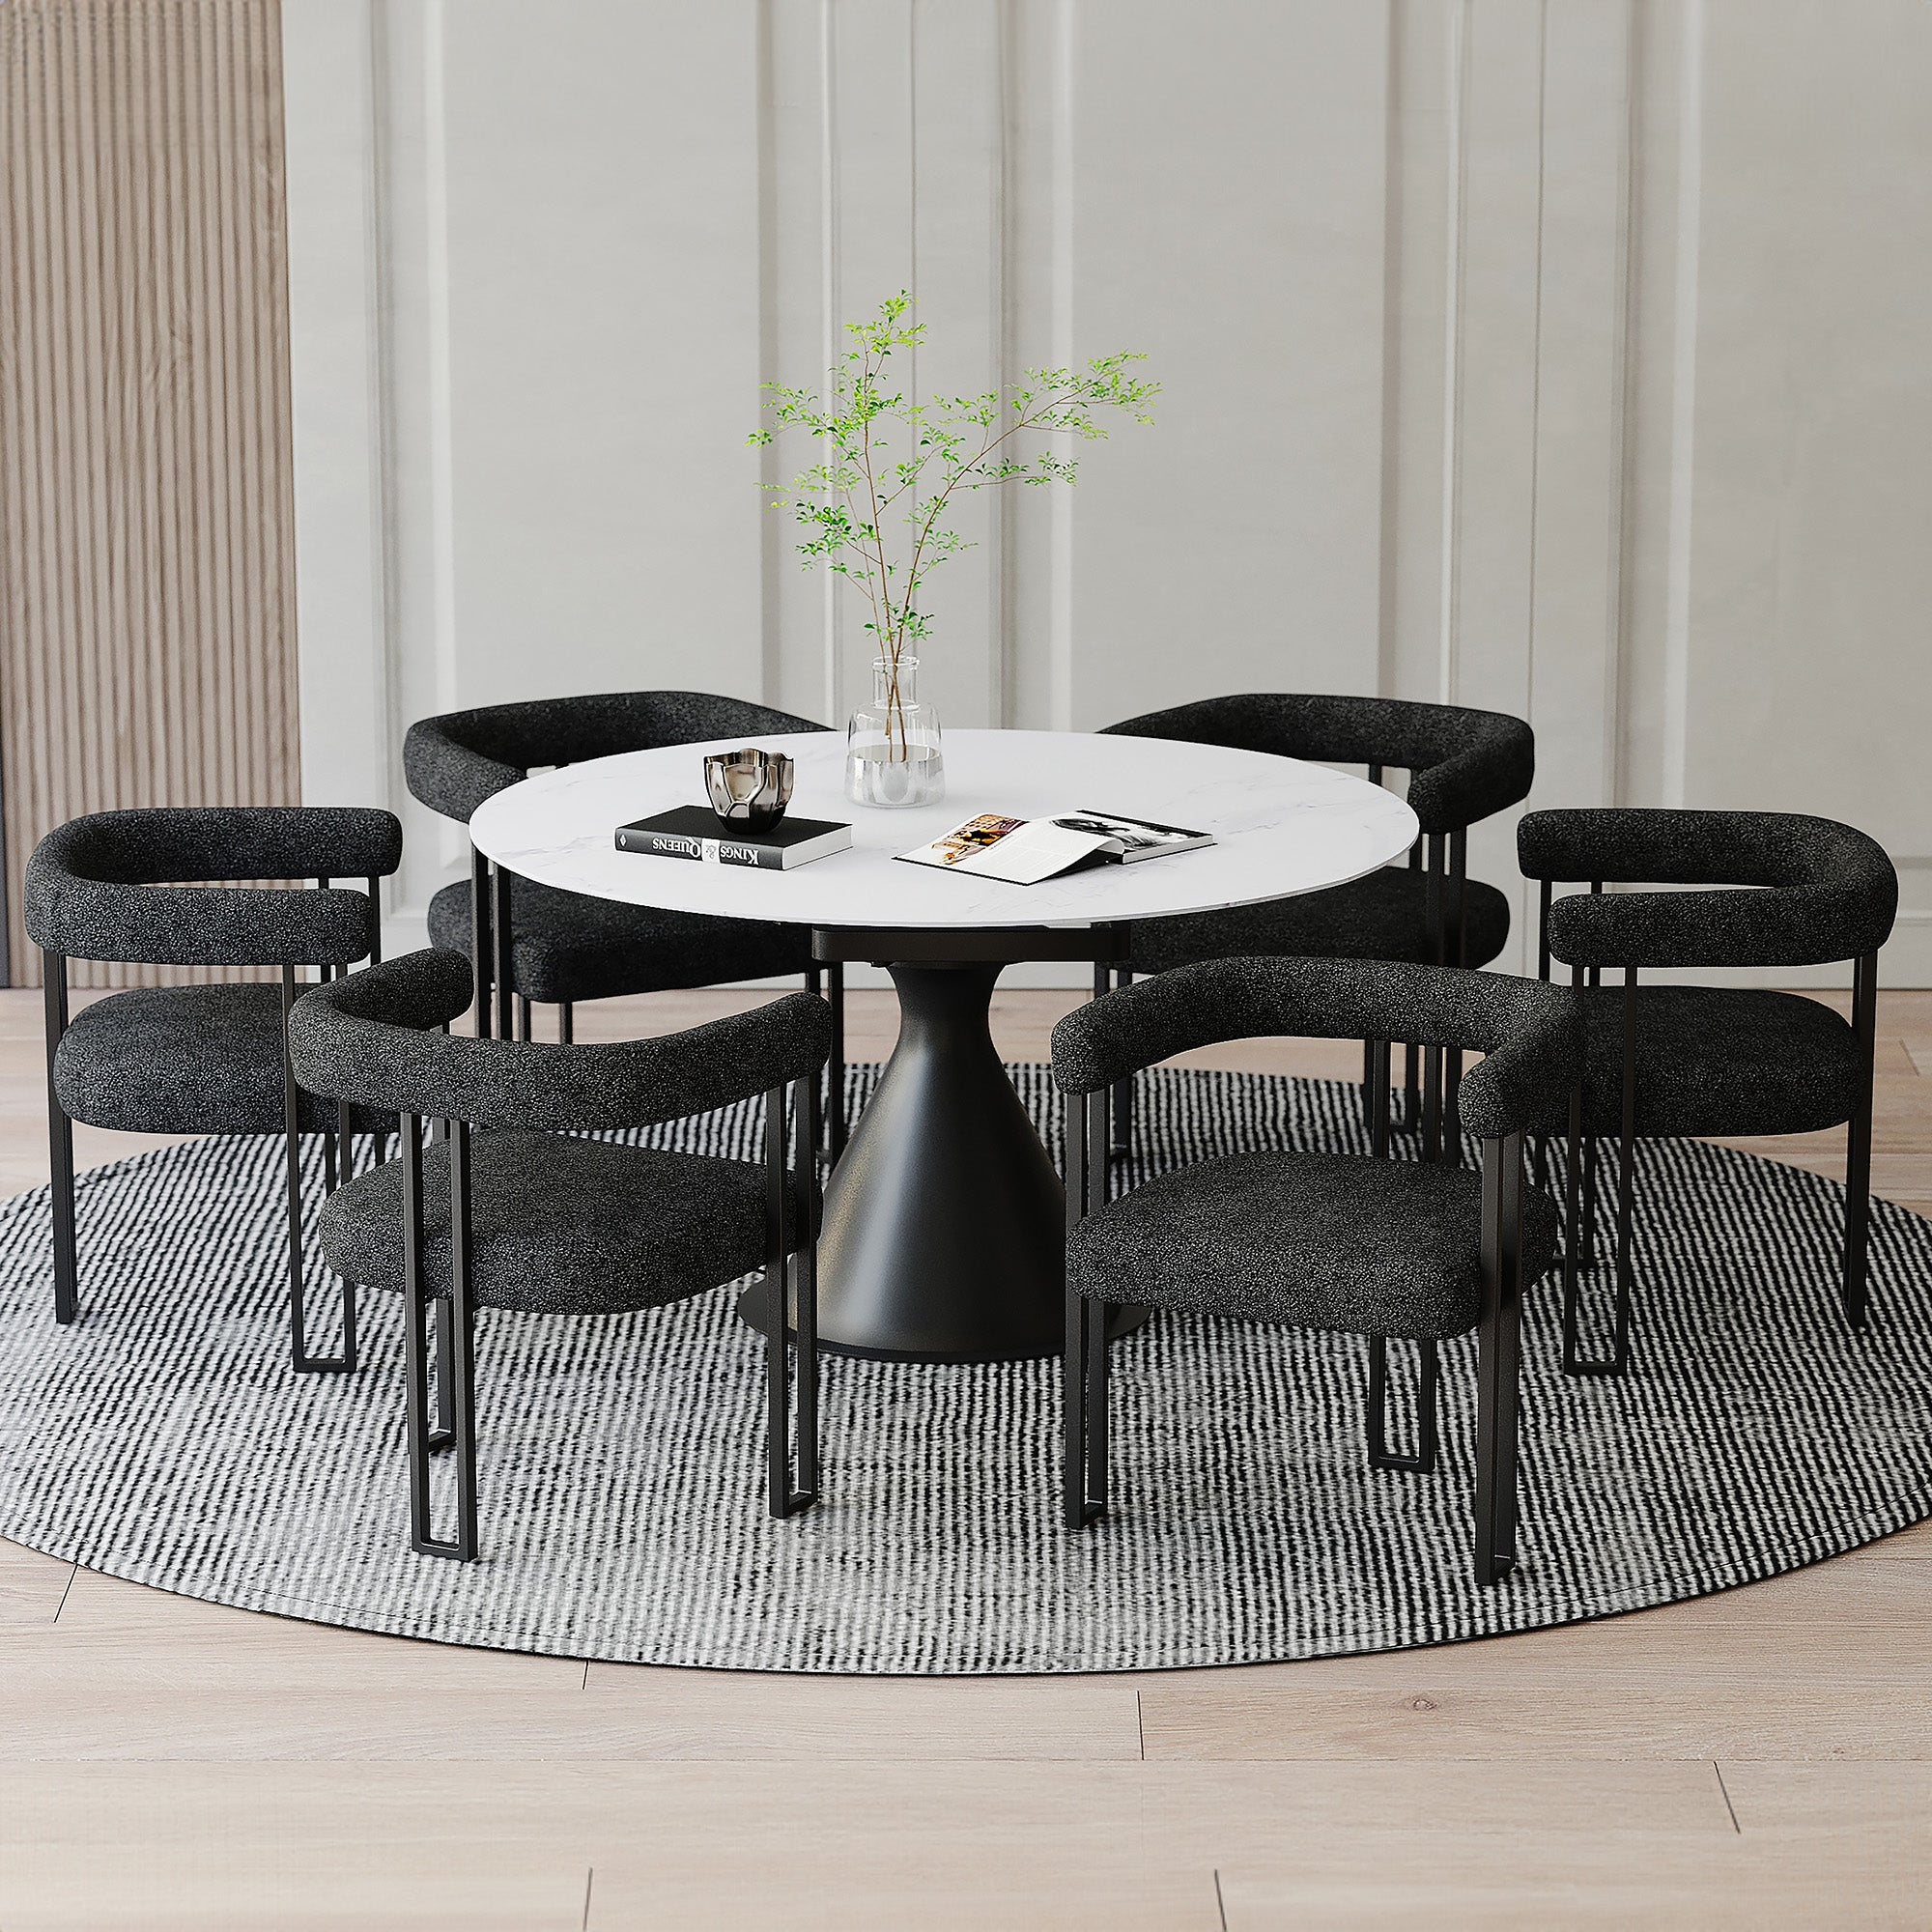 Unique and stylish dining room tables in Toronto